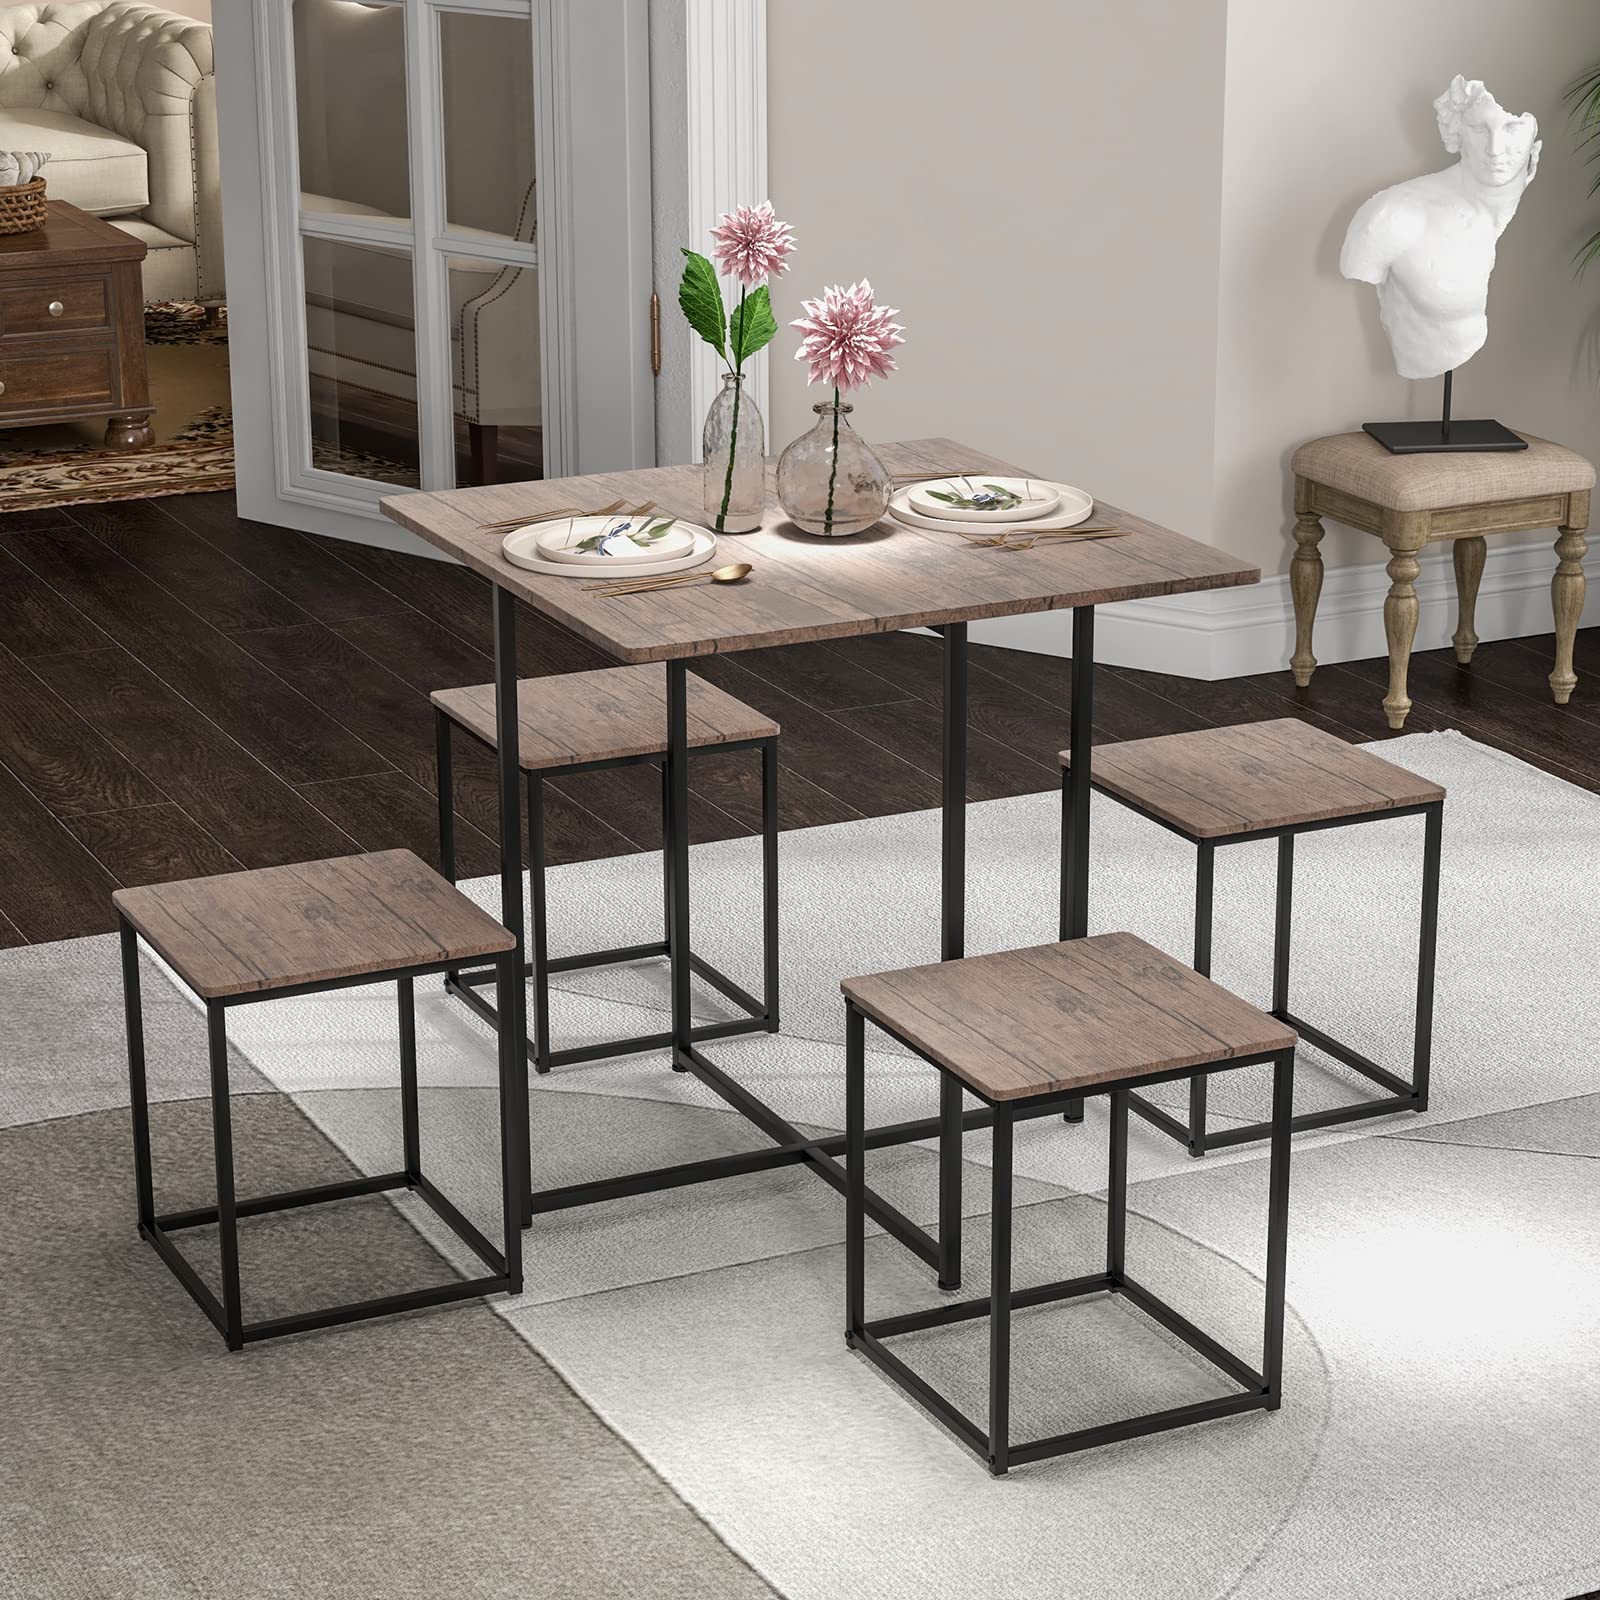 Giantex 5 Piece Dining Table Set, Industrial Kitchen Table Set w/ 4 Stools